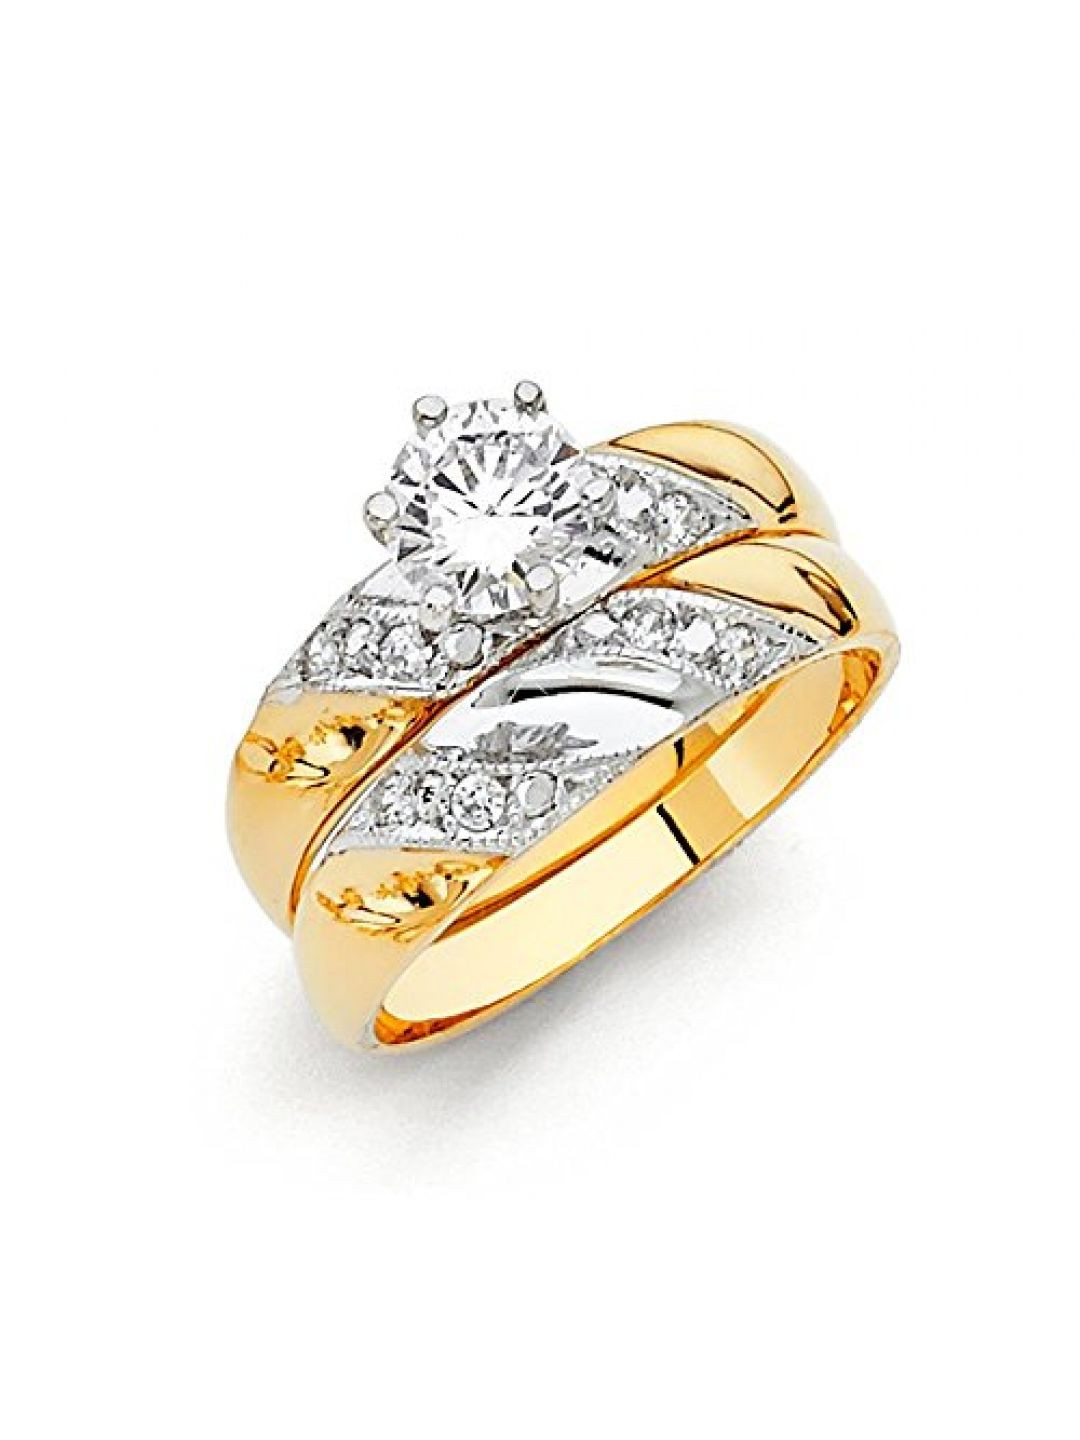 Two Tone Wedding Ring Sets
 14k Two Tone Gold SOLID Engagement Ring and Wedding Band 2